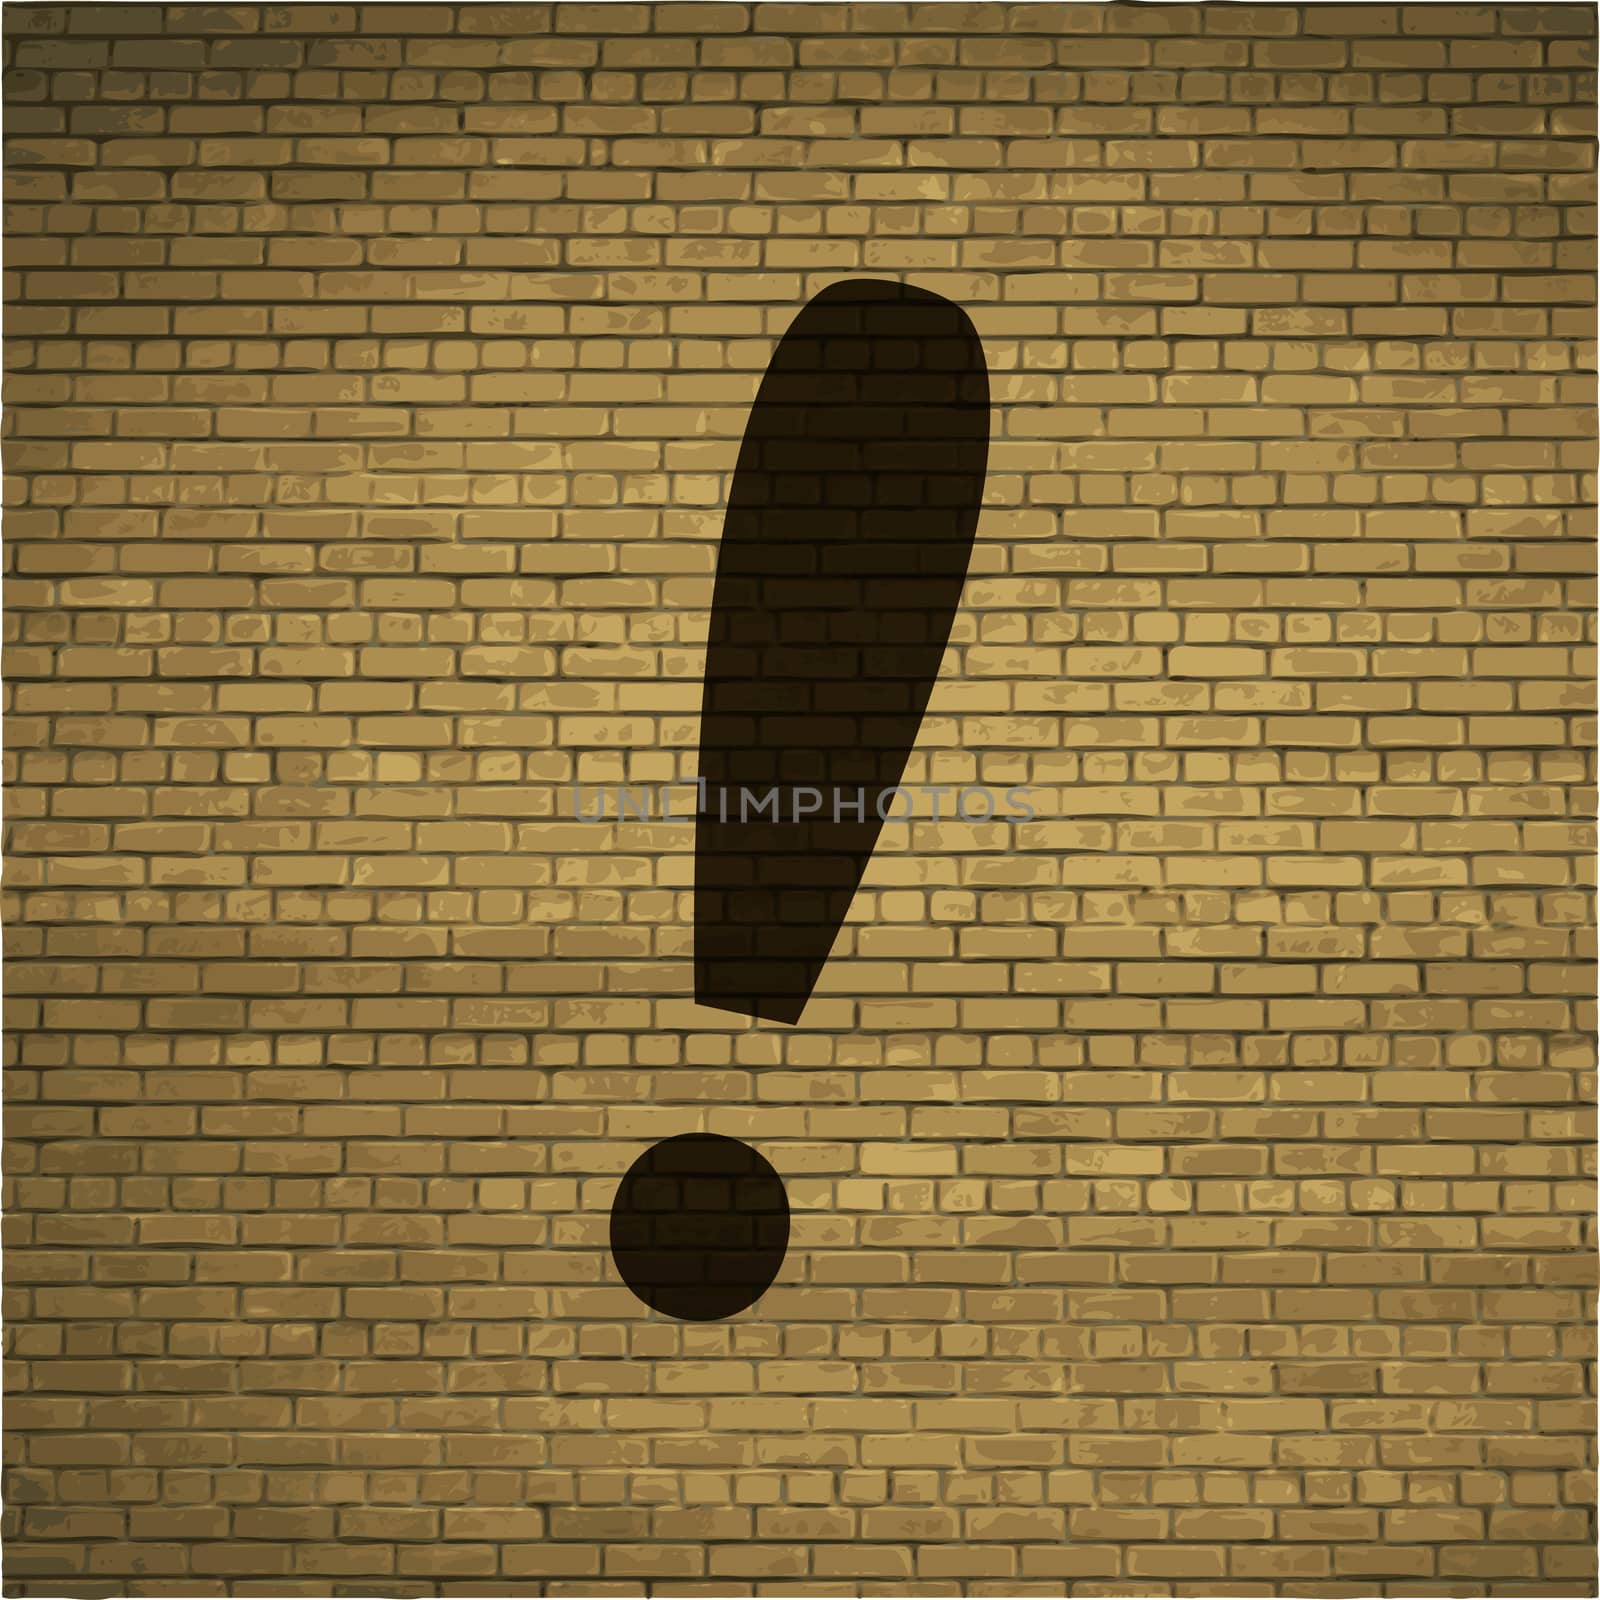 The exclamation point icon Flat with abstract background.